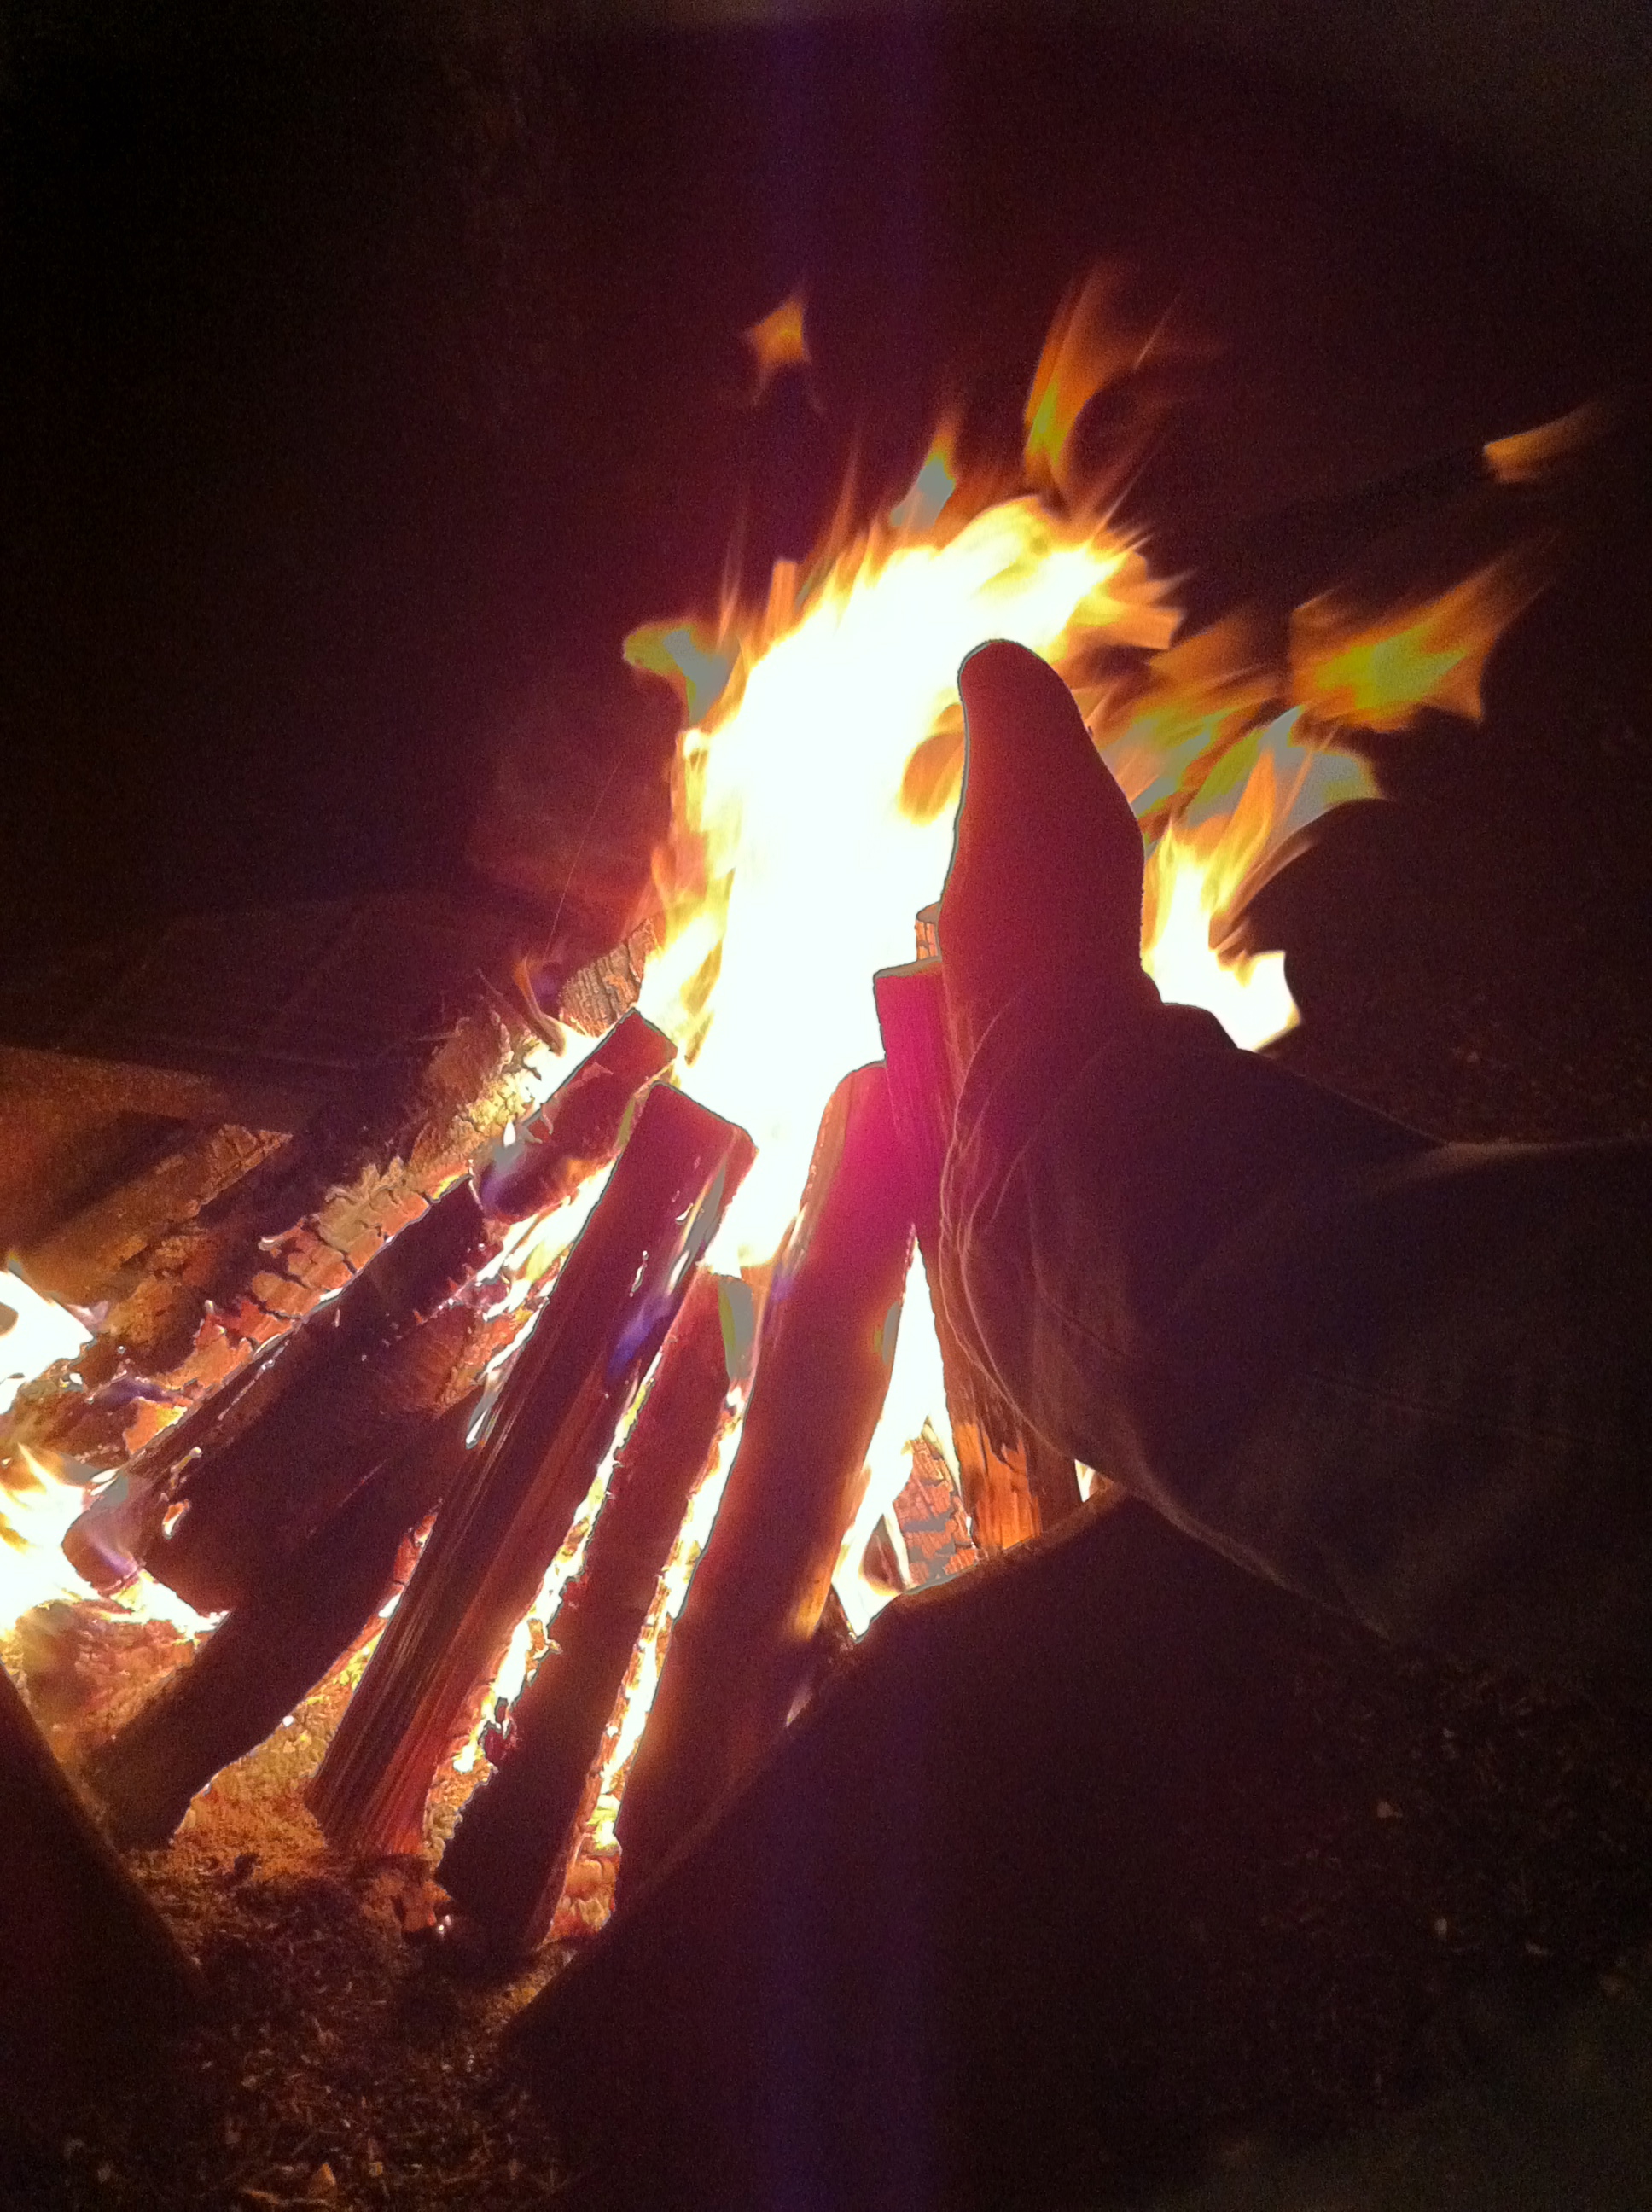 Drying Feet in the Fire While Camping In Chilkat State Park